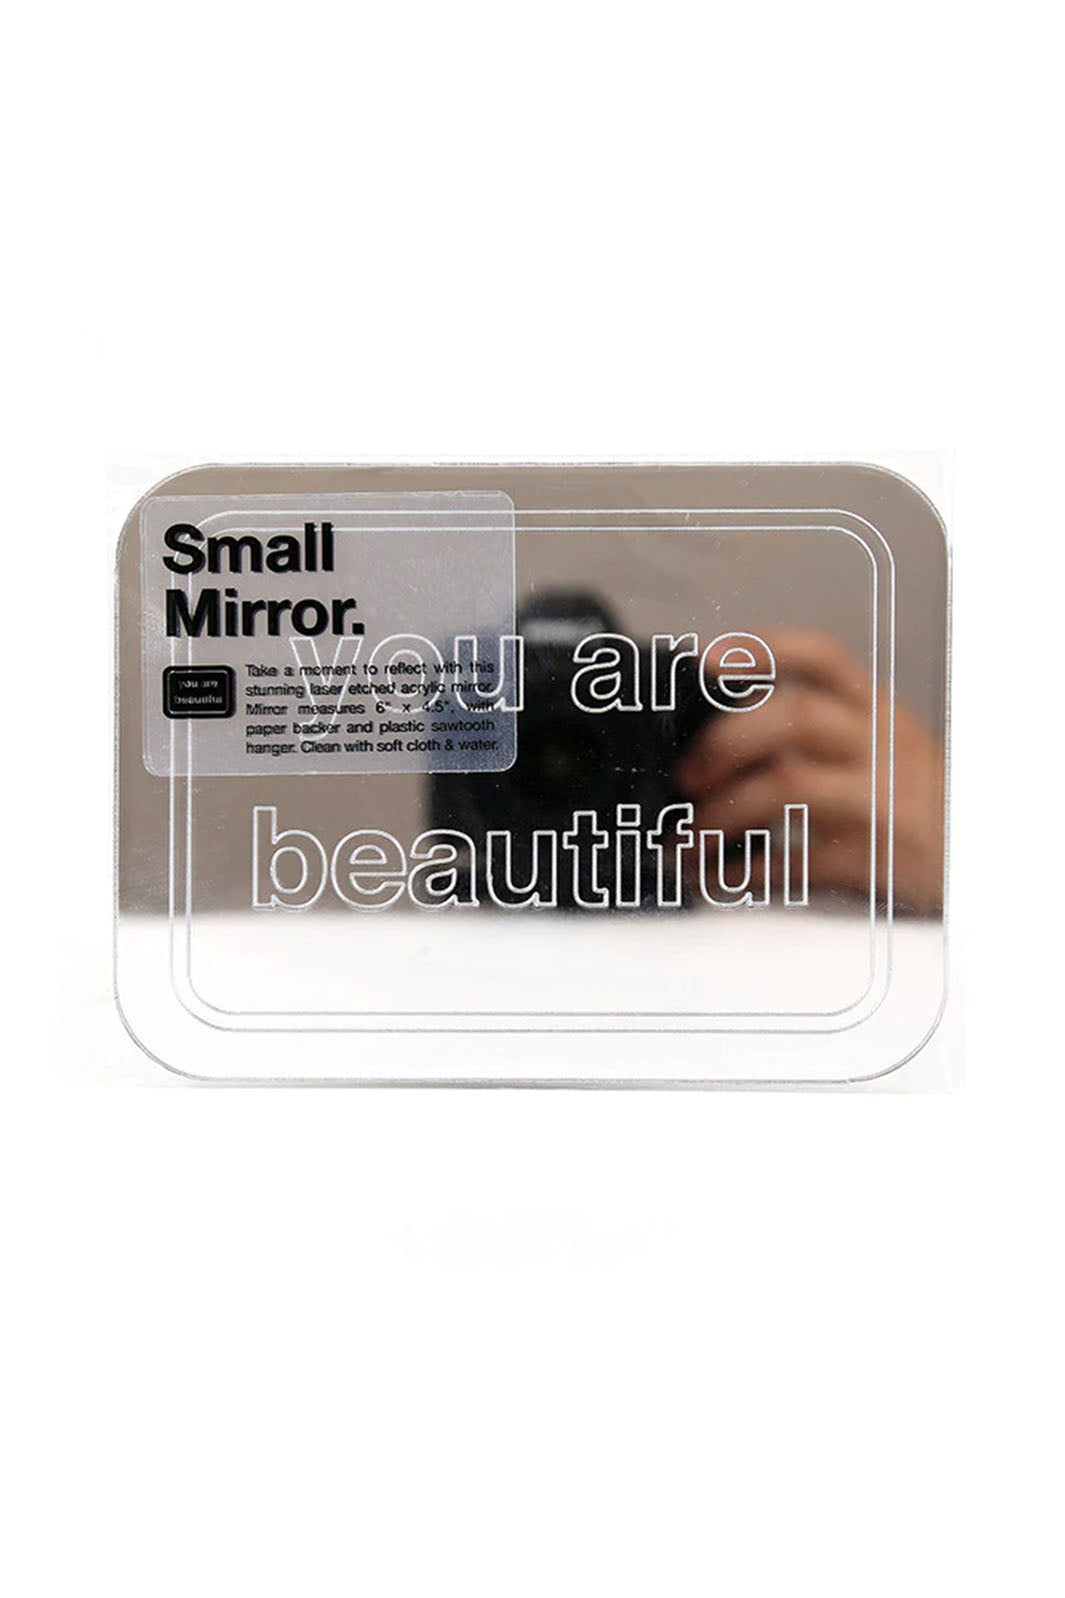 You are Beautiful Mirror - Small